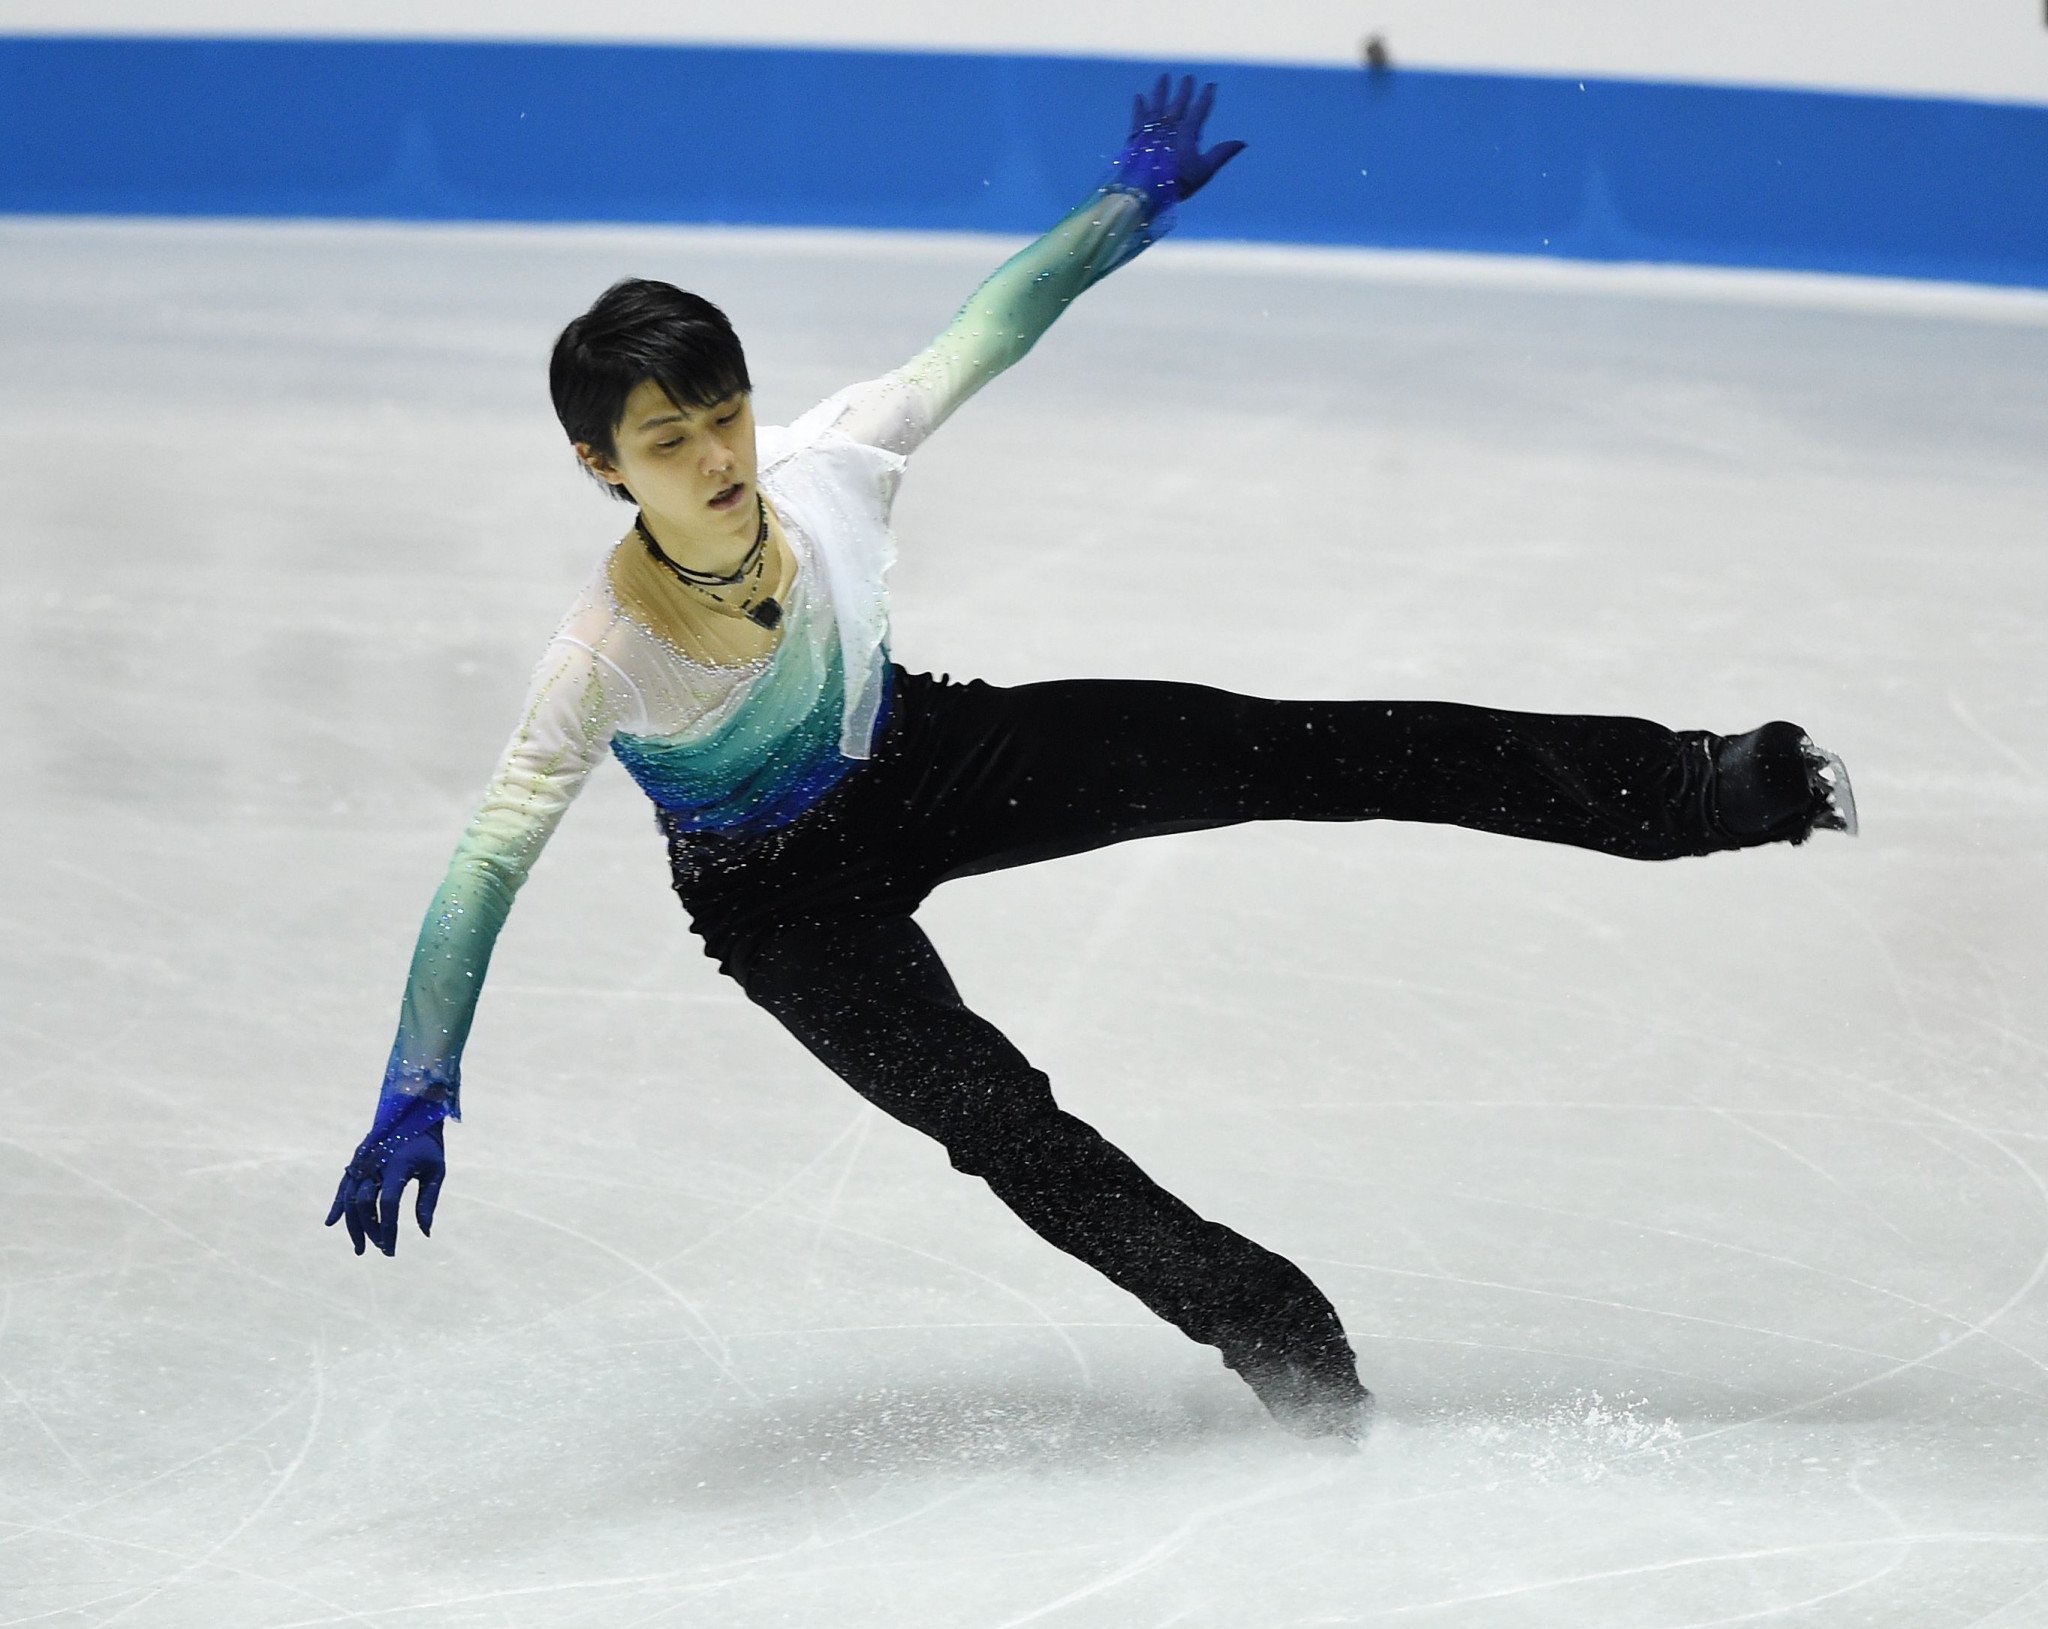 Olympic champion Yuzuru Hanyu of Japan will be targeting a winning start to his campaign when he competes in the men's singles at the ISU Grand Prix of Figure Skating in Moscow ©Getty Images